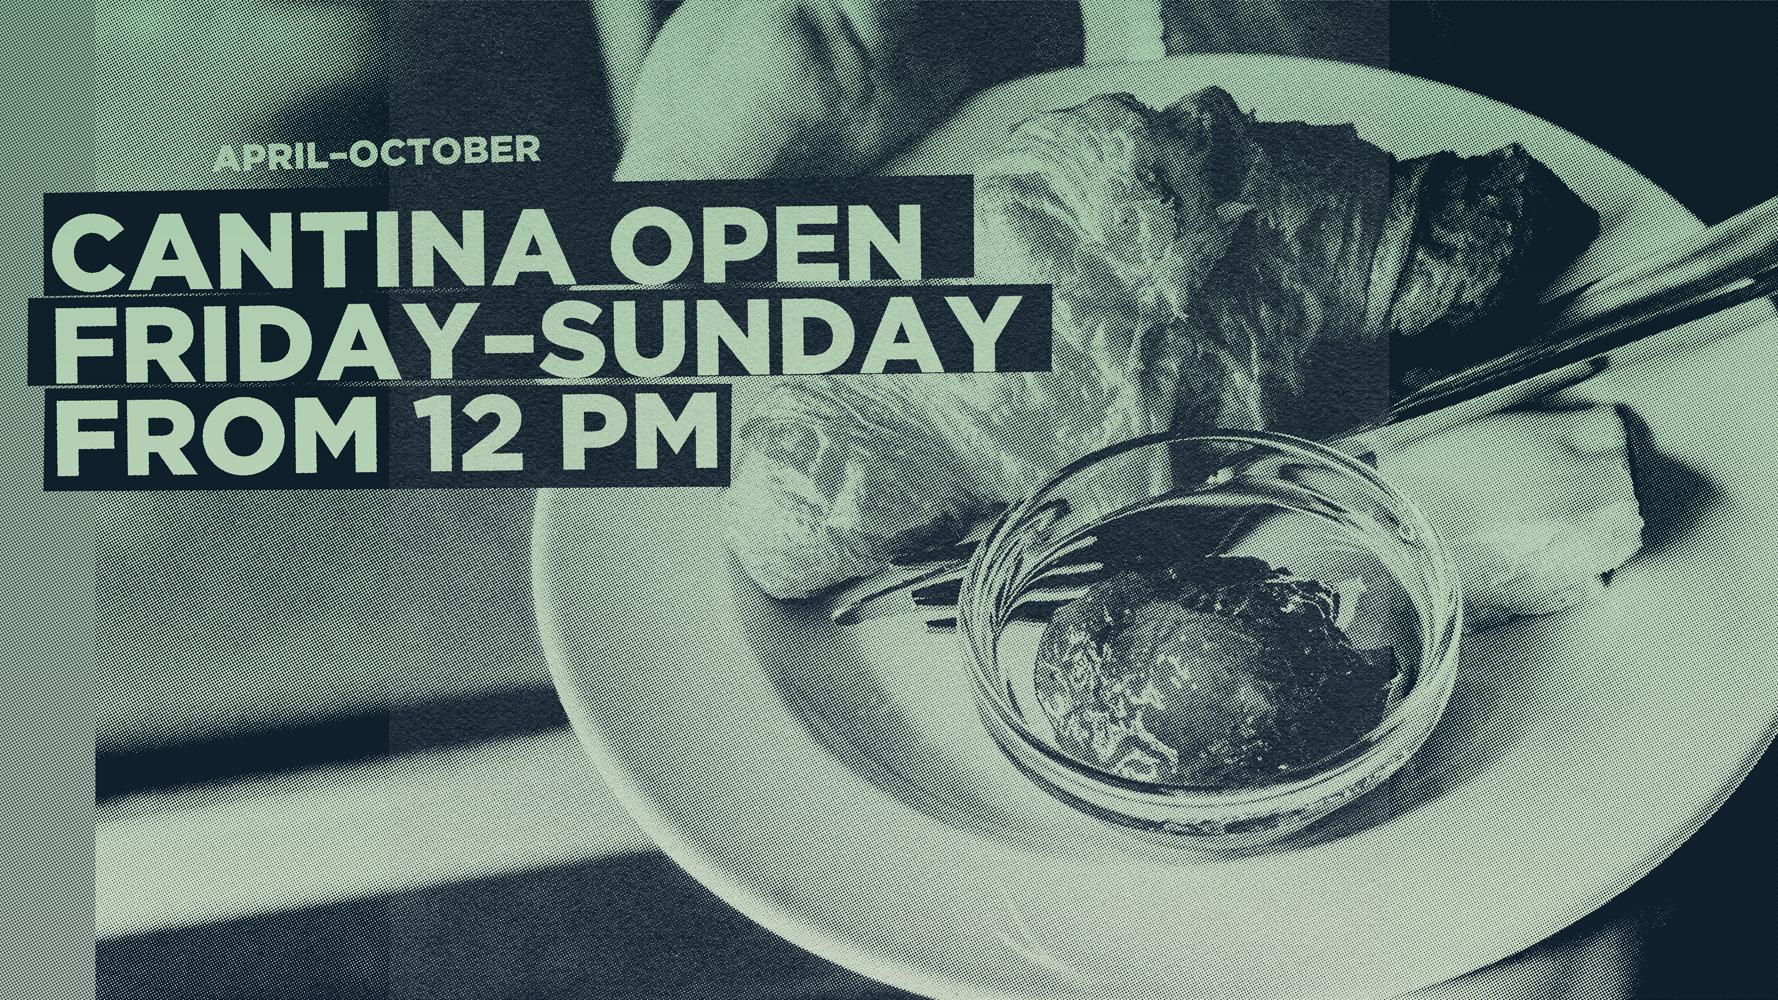 cantina open friday - sunday from 12 pm